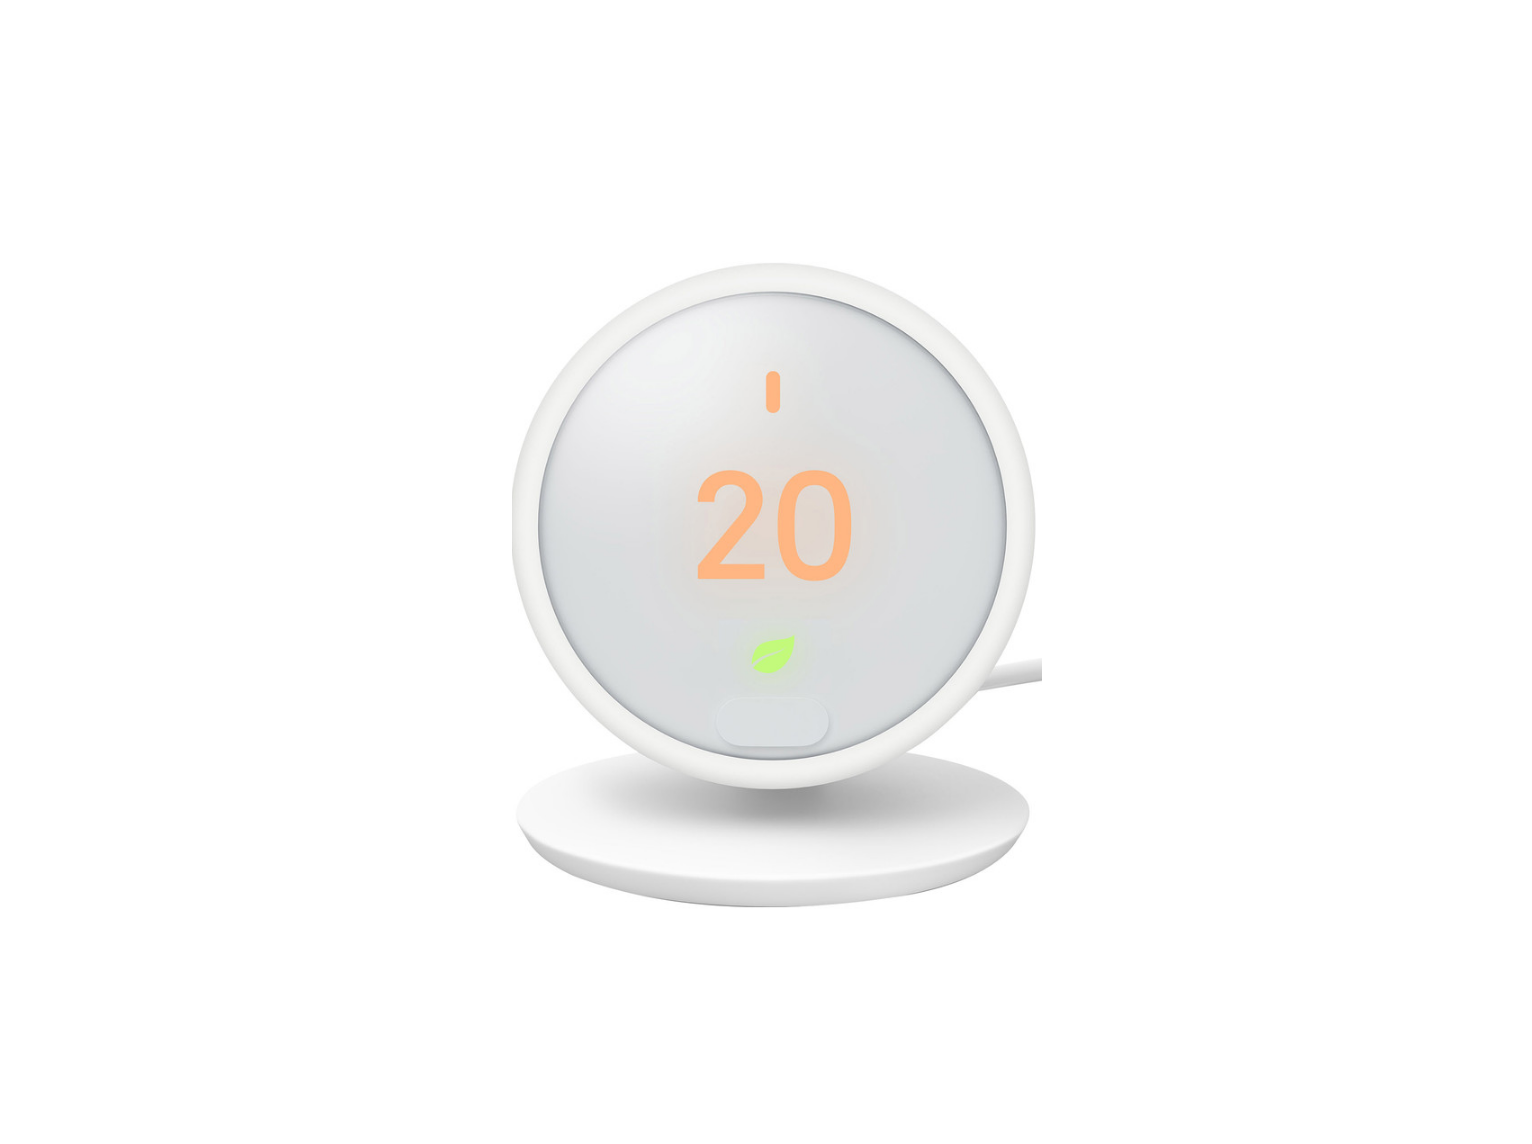 Google NEST HF001235-GB Nest Smart Thermostat Product Specifications Guide